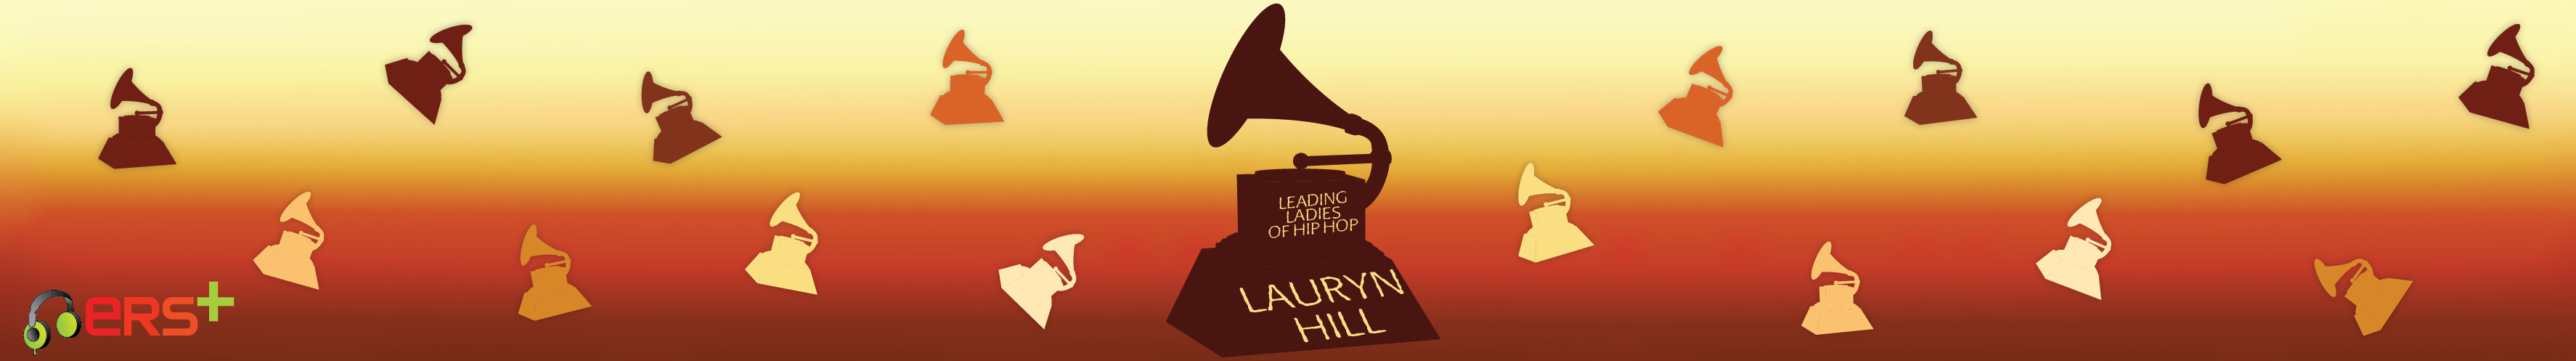 Leading Ladies of Hip Hop, Hip Hop, 50 years of Hip Hop, Ms. Lauryn Hill, WERS 88.9, ERS+